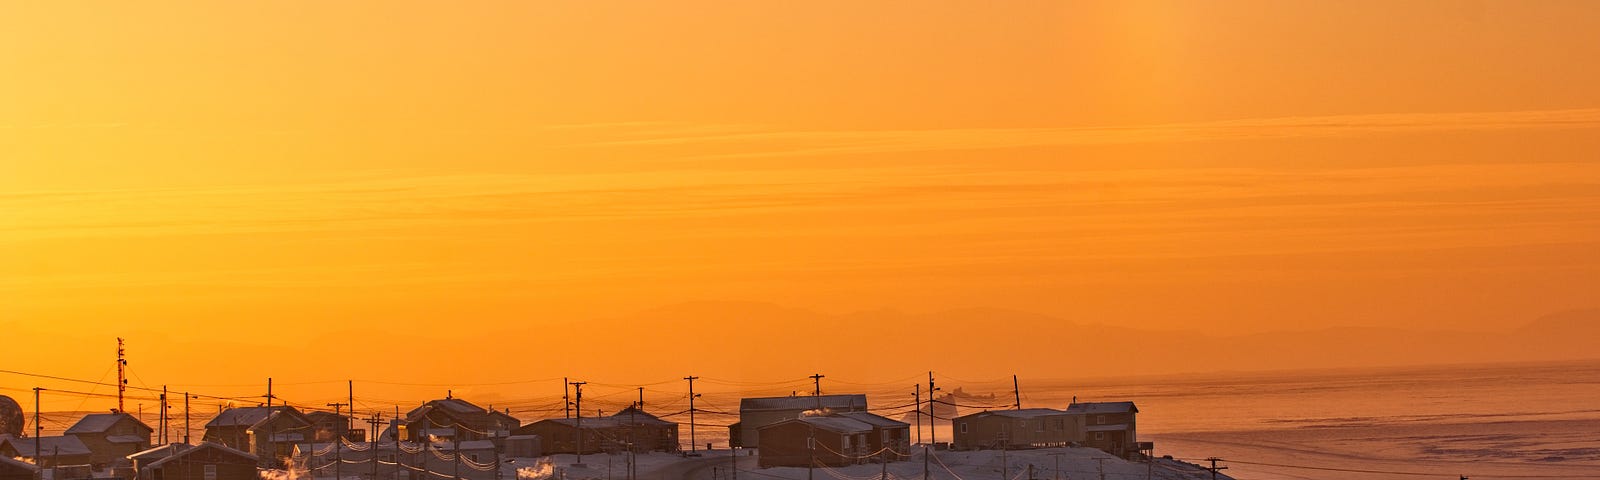 View of Pond Inlet Inuit community on Baffin Island. From a distance, orange and pink sky. Houses covered in snow.